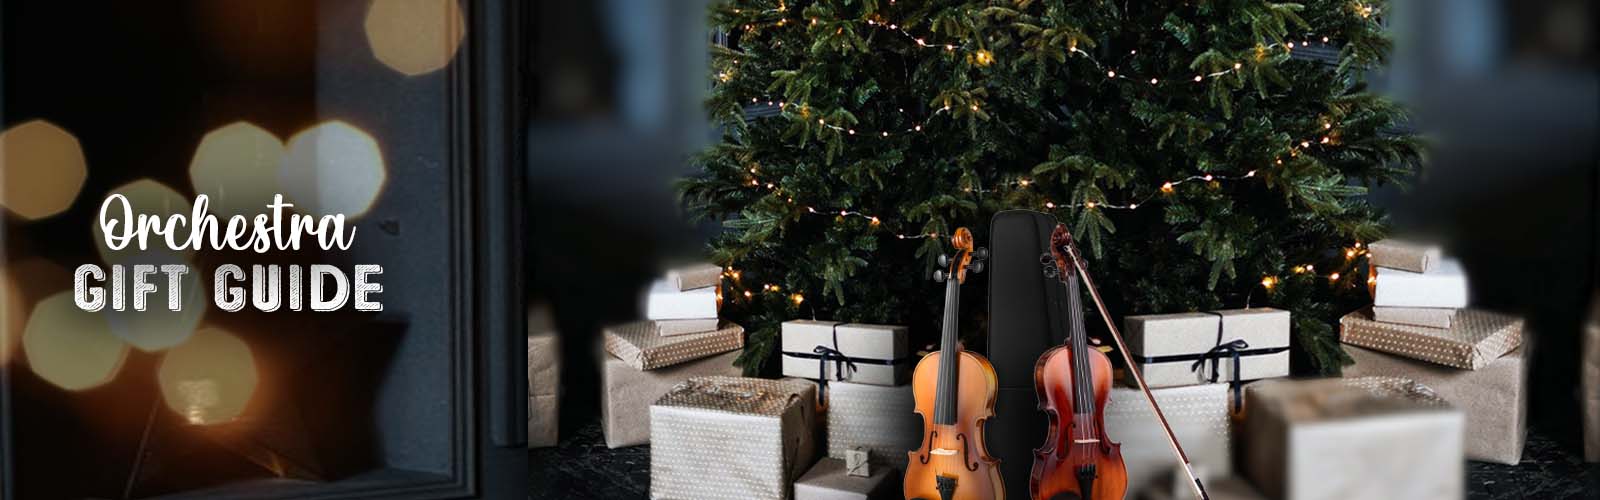 Orchestra Instrument Gift Guide Banner